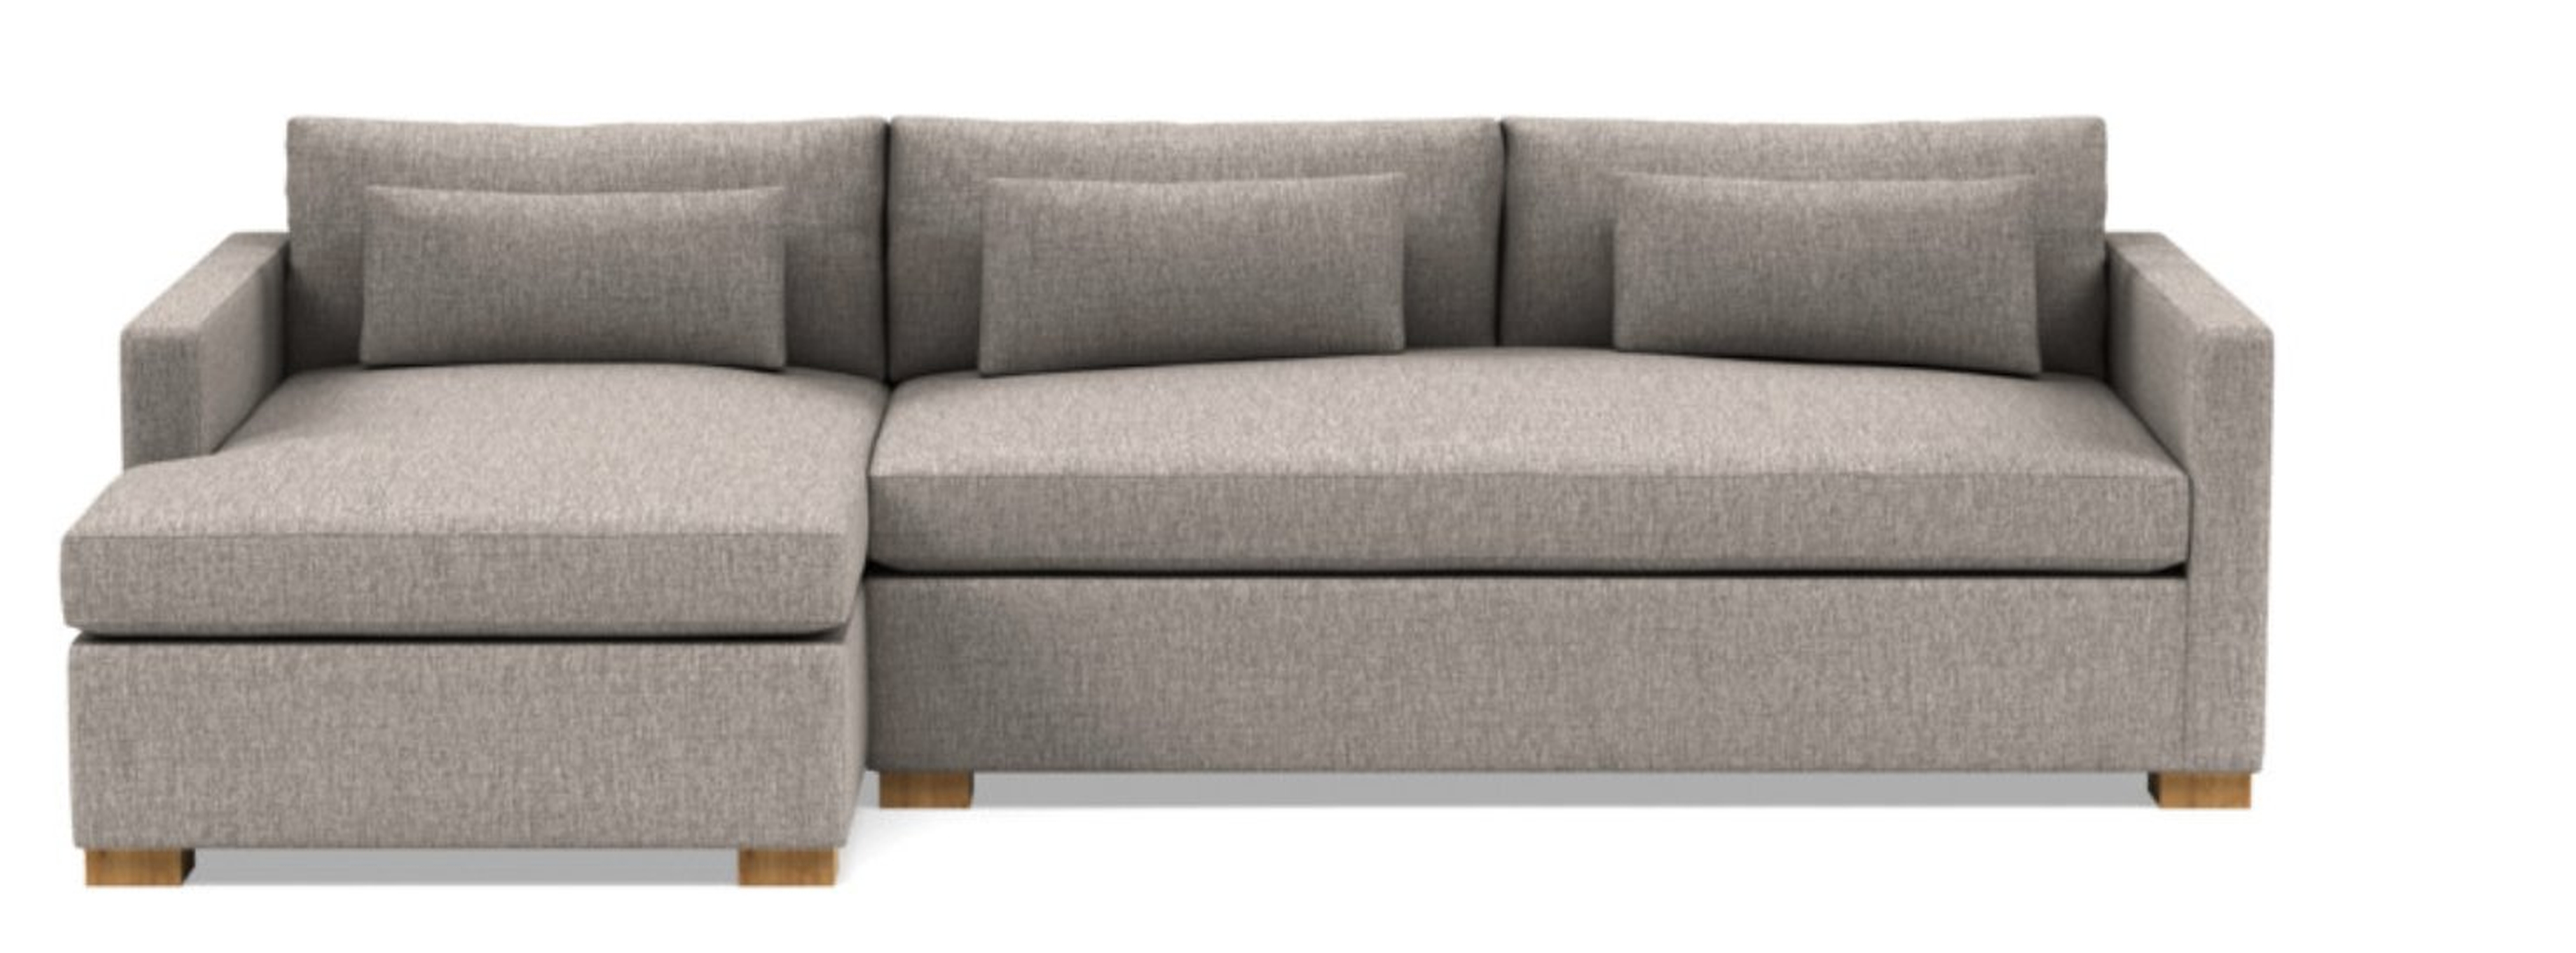 Charly Sleeper Sectional with Brown Earth Fabric, down alternative cushions, Long chaise, and Natural Oak legs - Interior Define